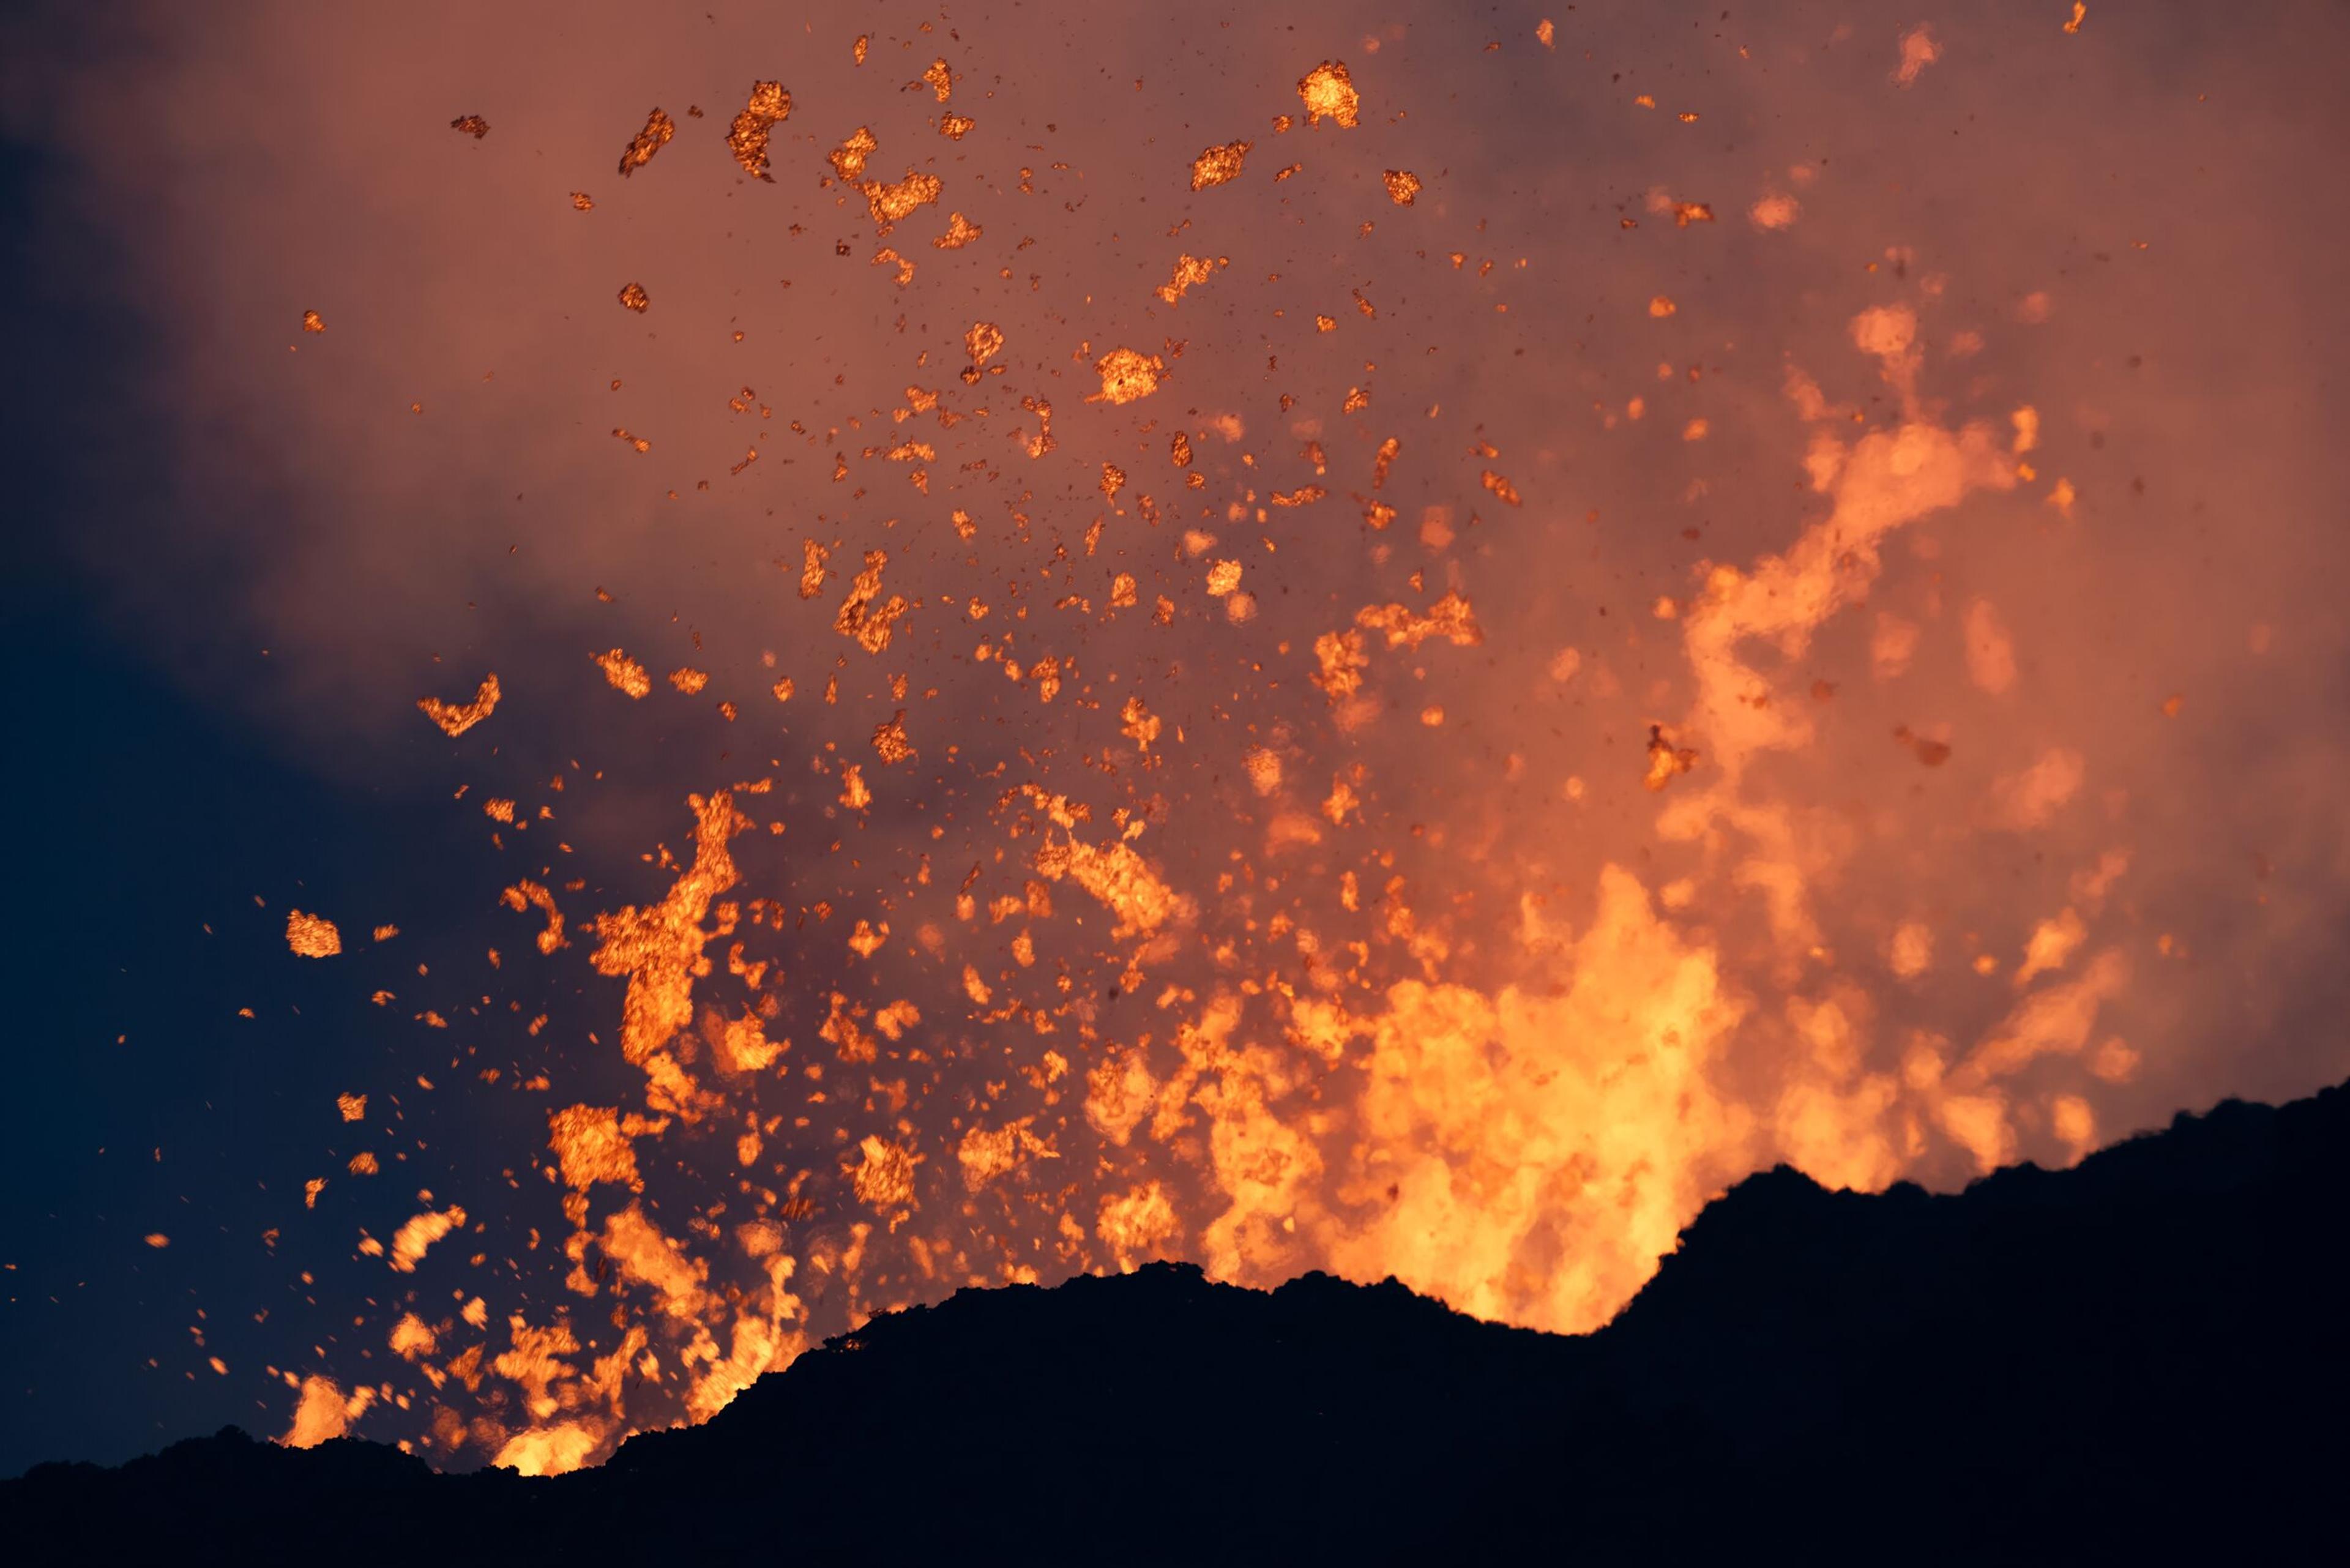 Close-up image of vibrant red lava erupting and splattering into the air, surrounded by billowing smoke.